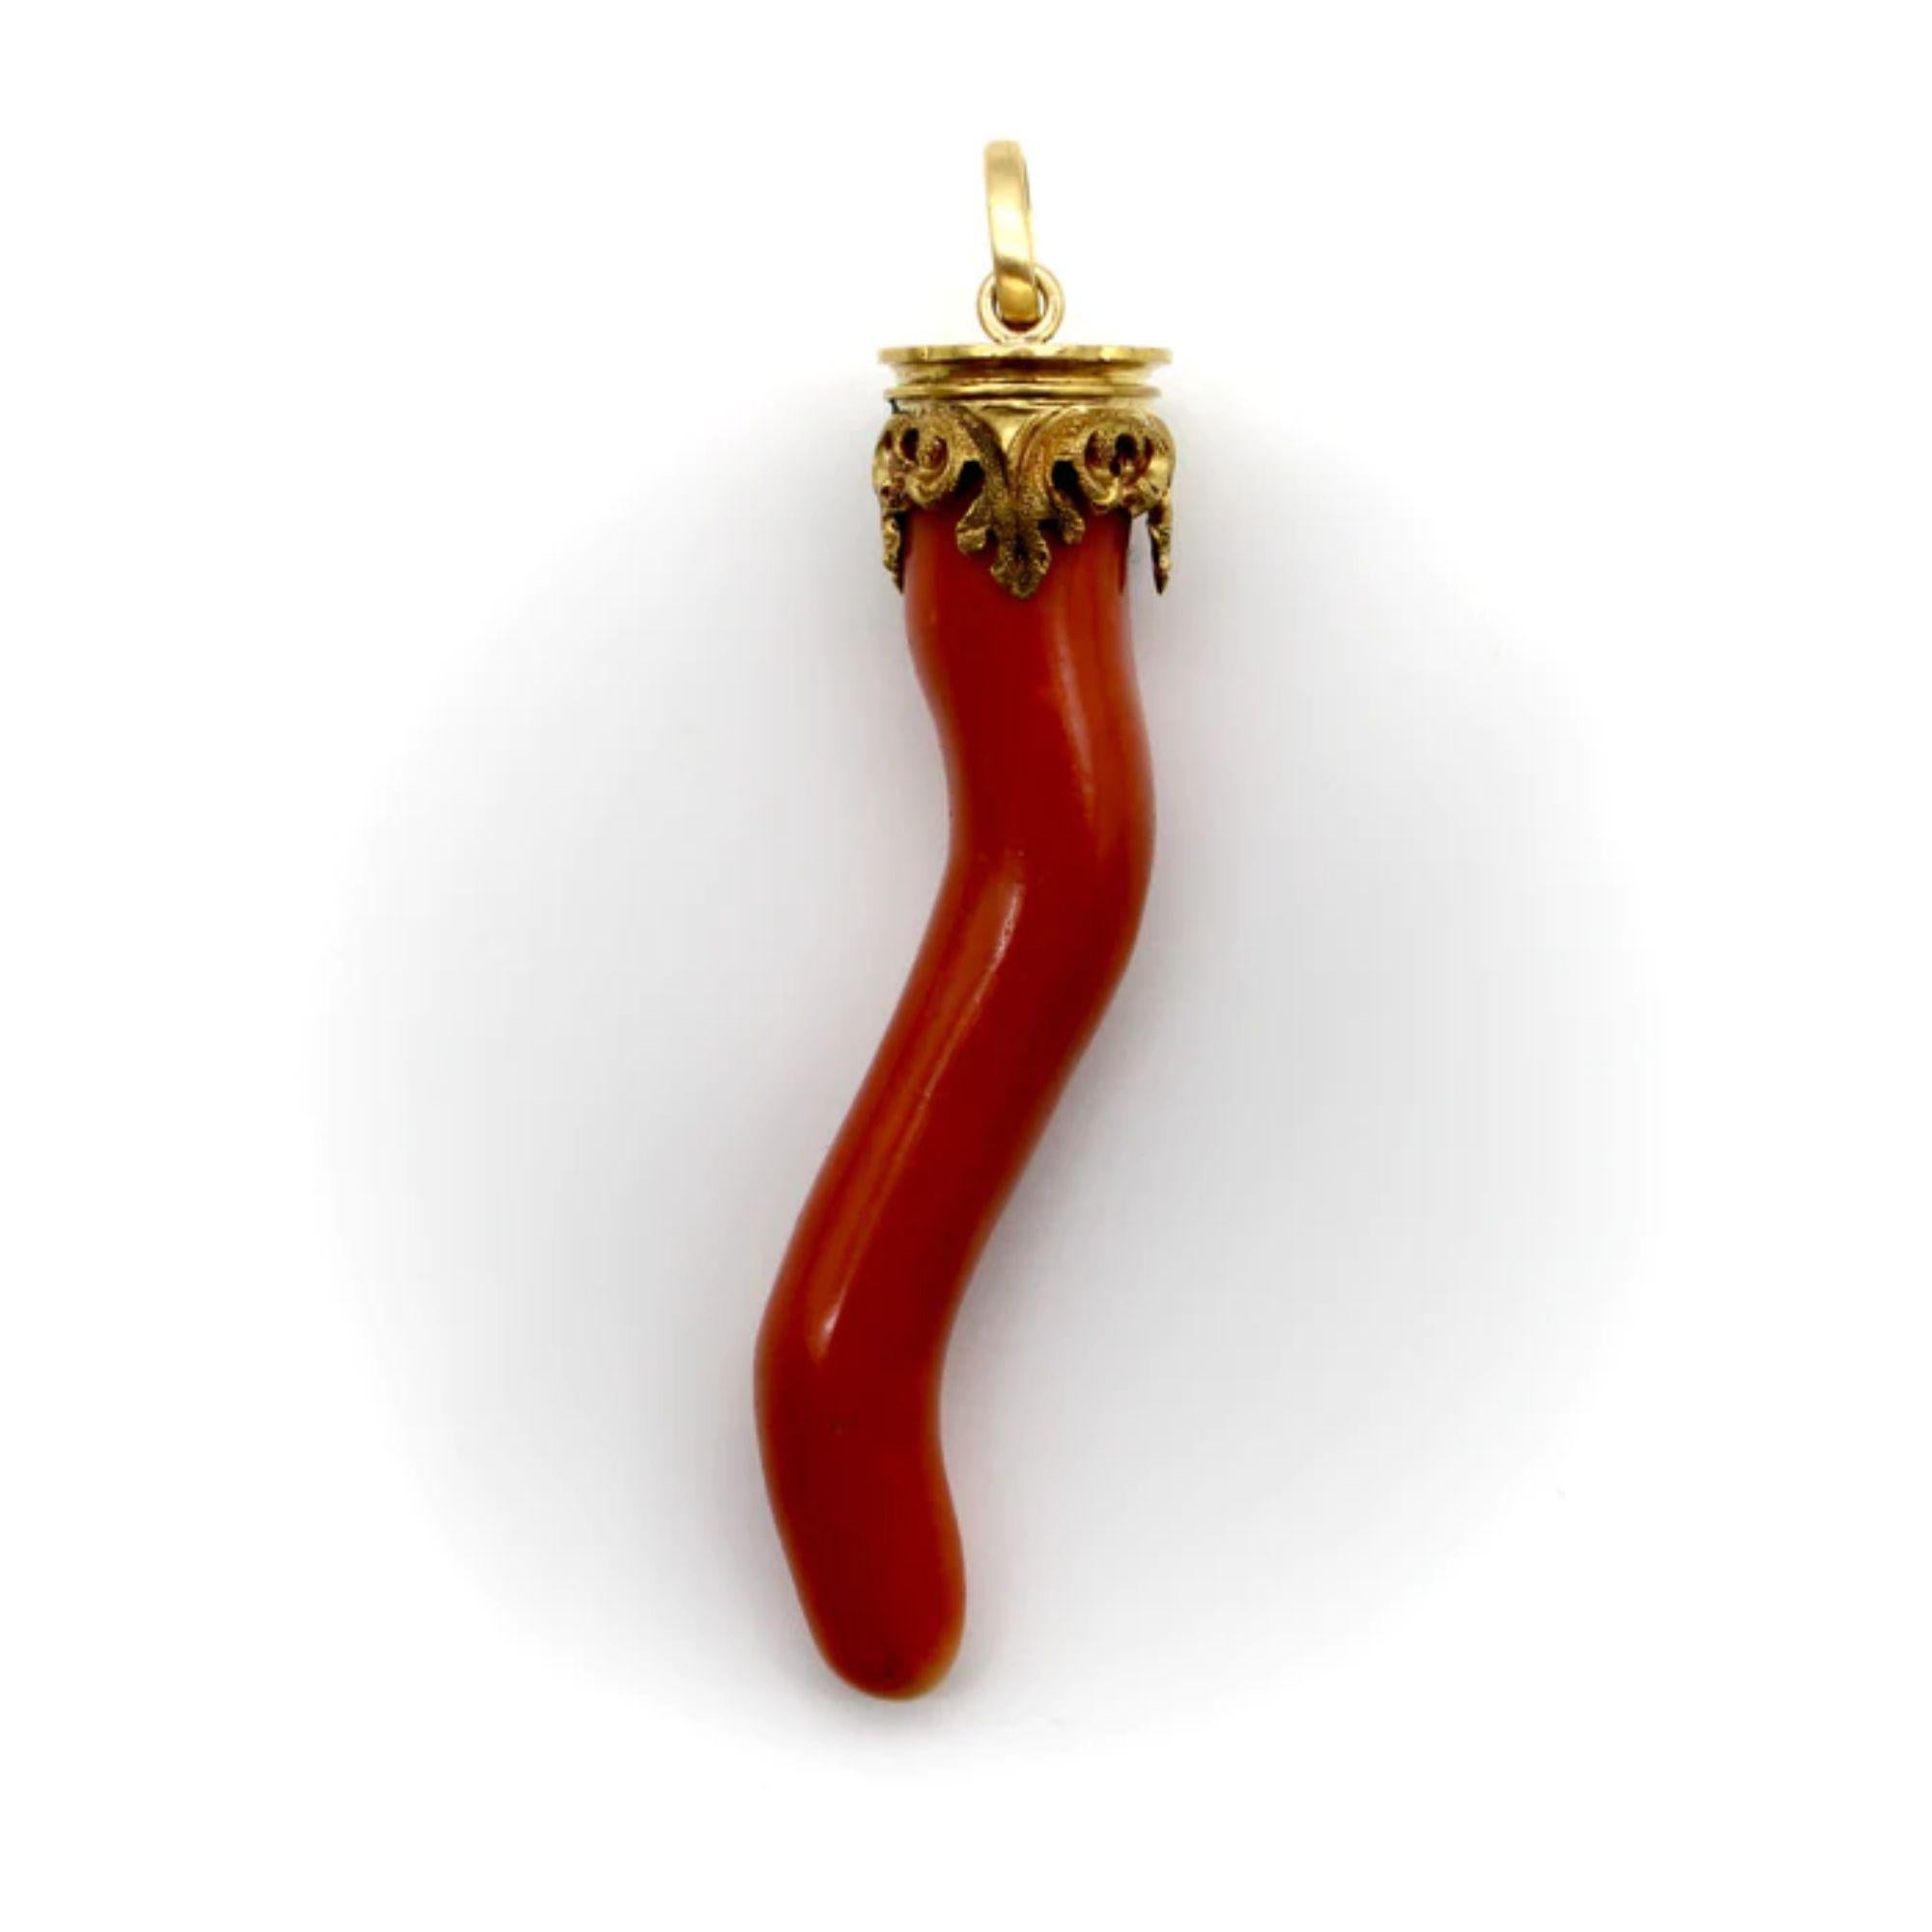 Uncut Victorian 18K Gold Capped Large Coral Large Cornicello Pendant For Sale